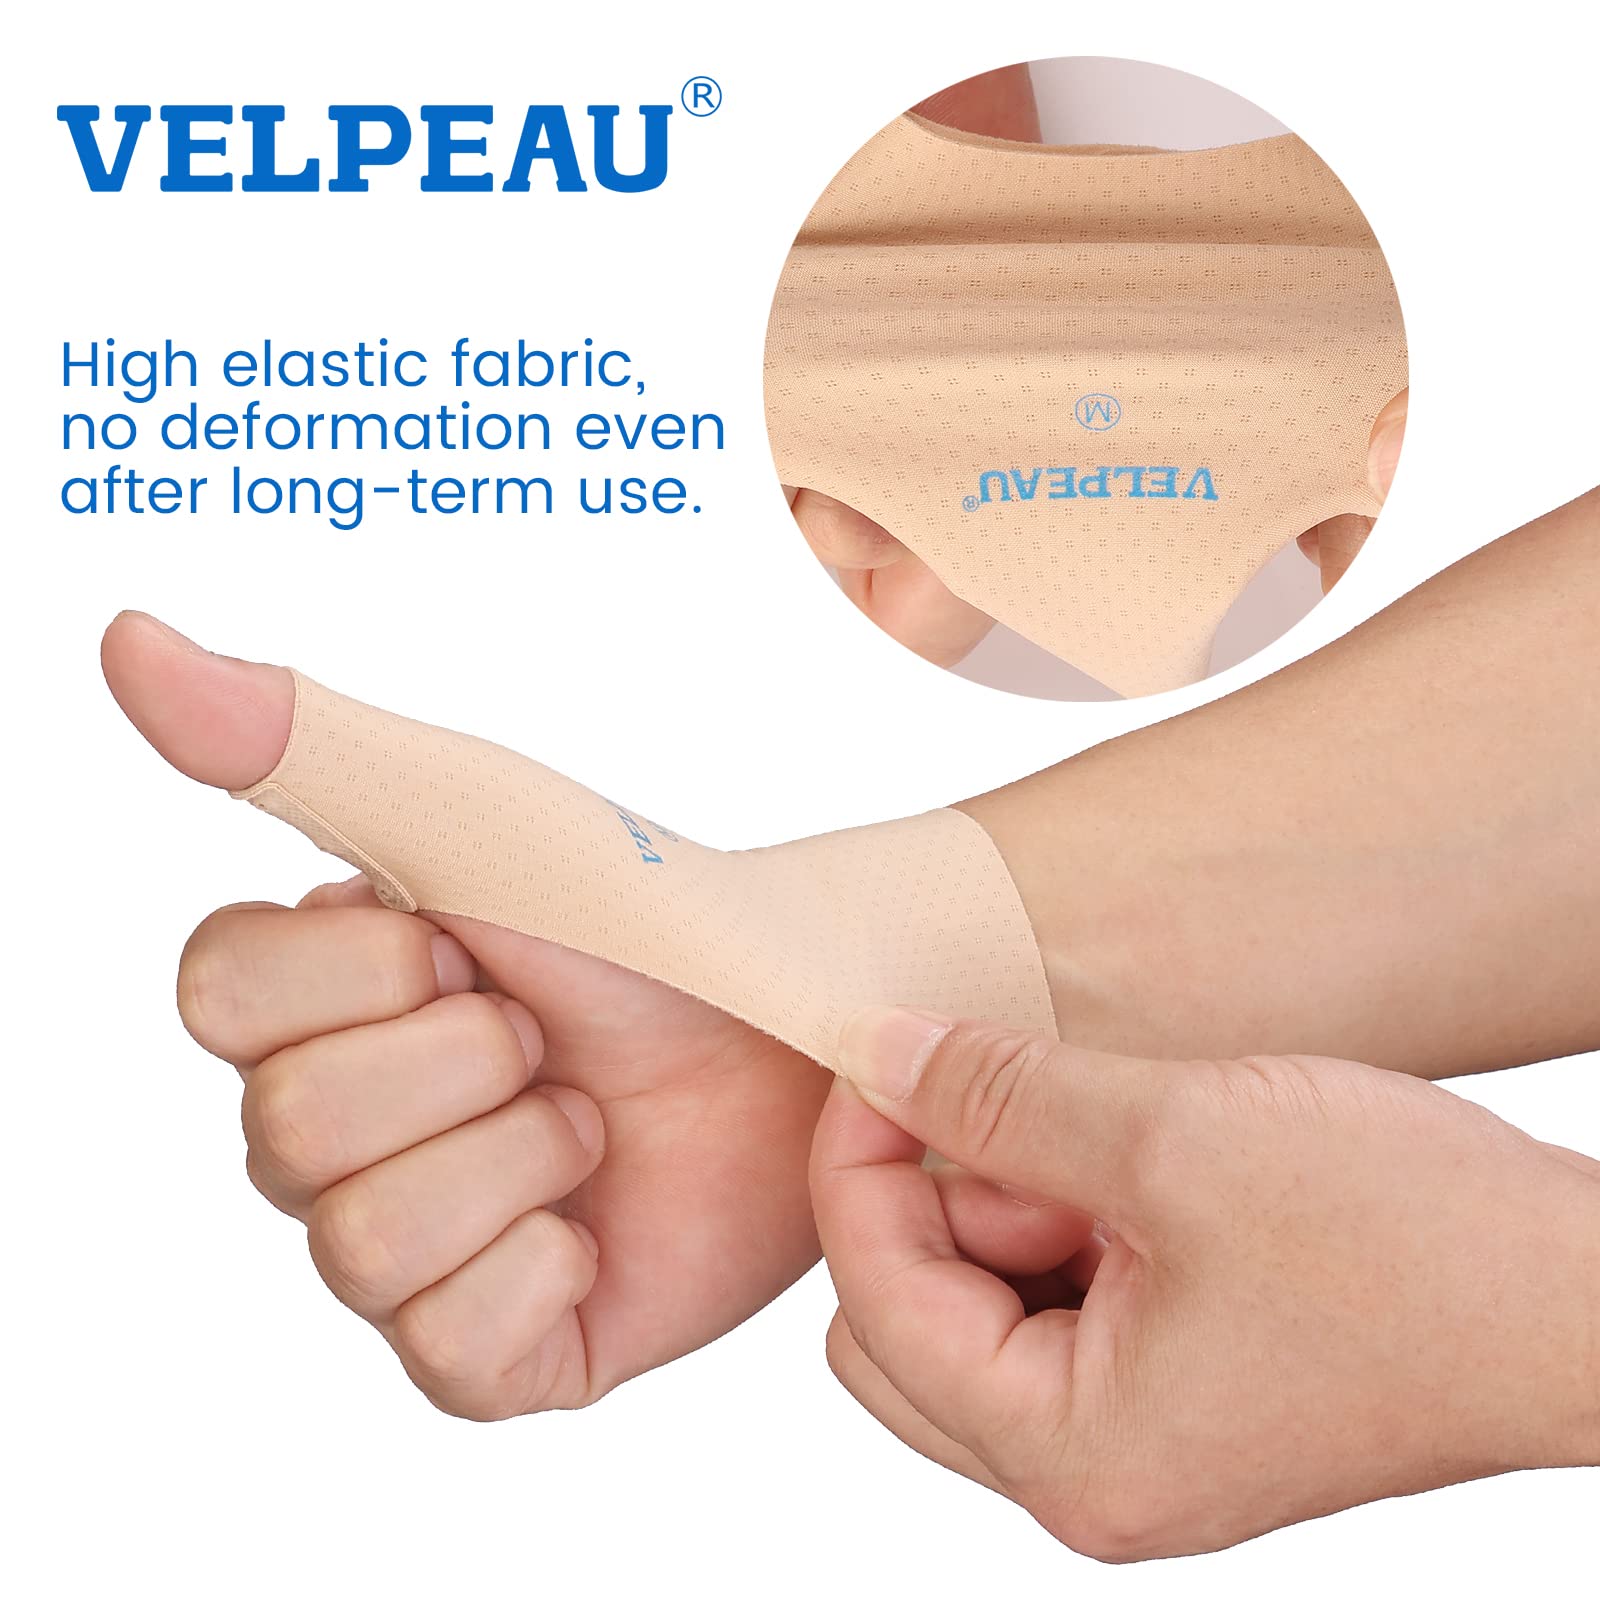 Velpeau Elastic Thumb Support Brace Liner (Pack of 2) - Waterproof Soft Thumb Compression Sleeve Protector for Relieving Pain, Arthritis, Joint Pain, Tendonitis, Sprains, Sports (Medium)